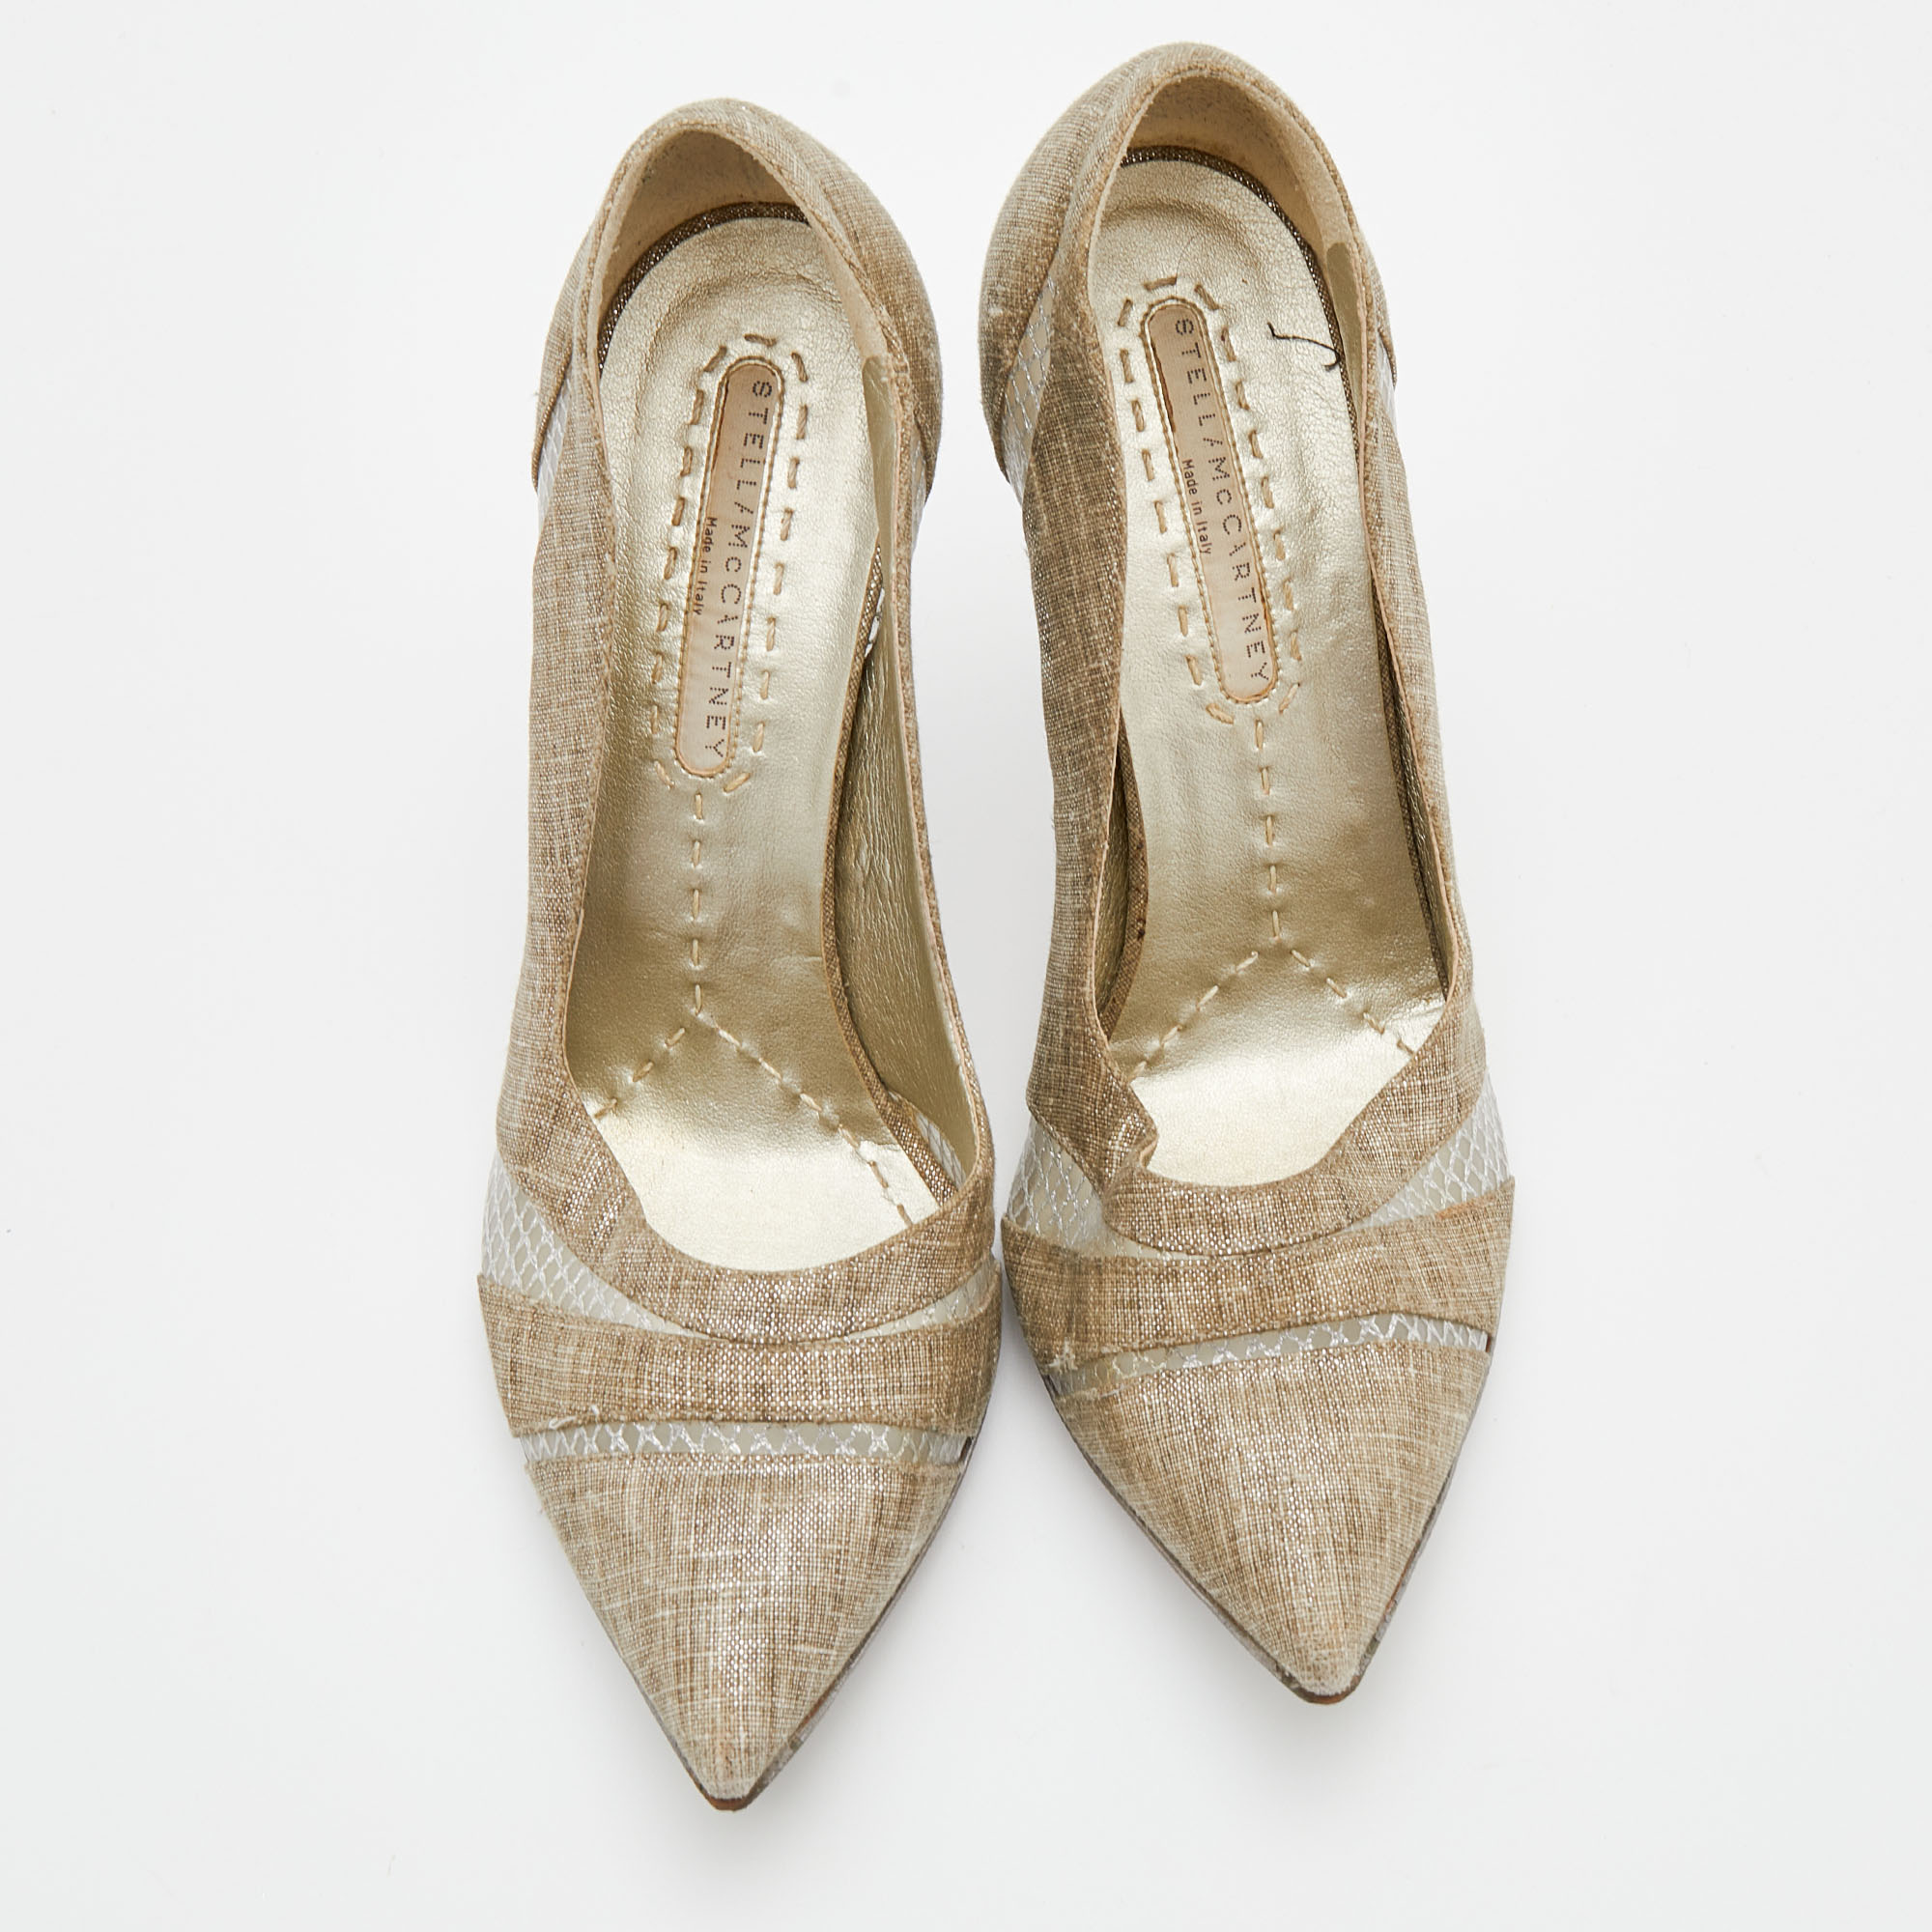 Stella McCartney Beige Fabric And Mesh Pointed Toe Pumps Size 38